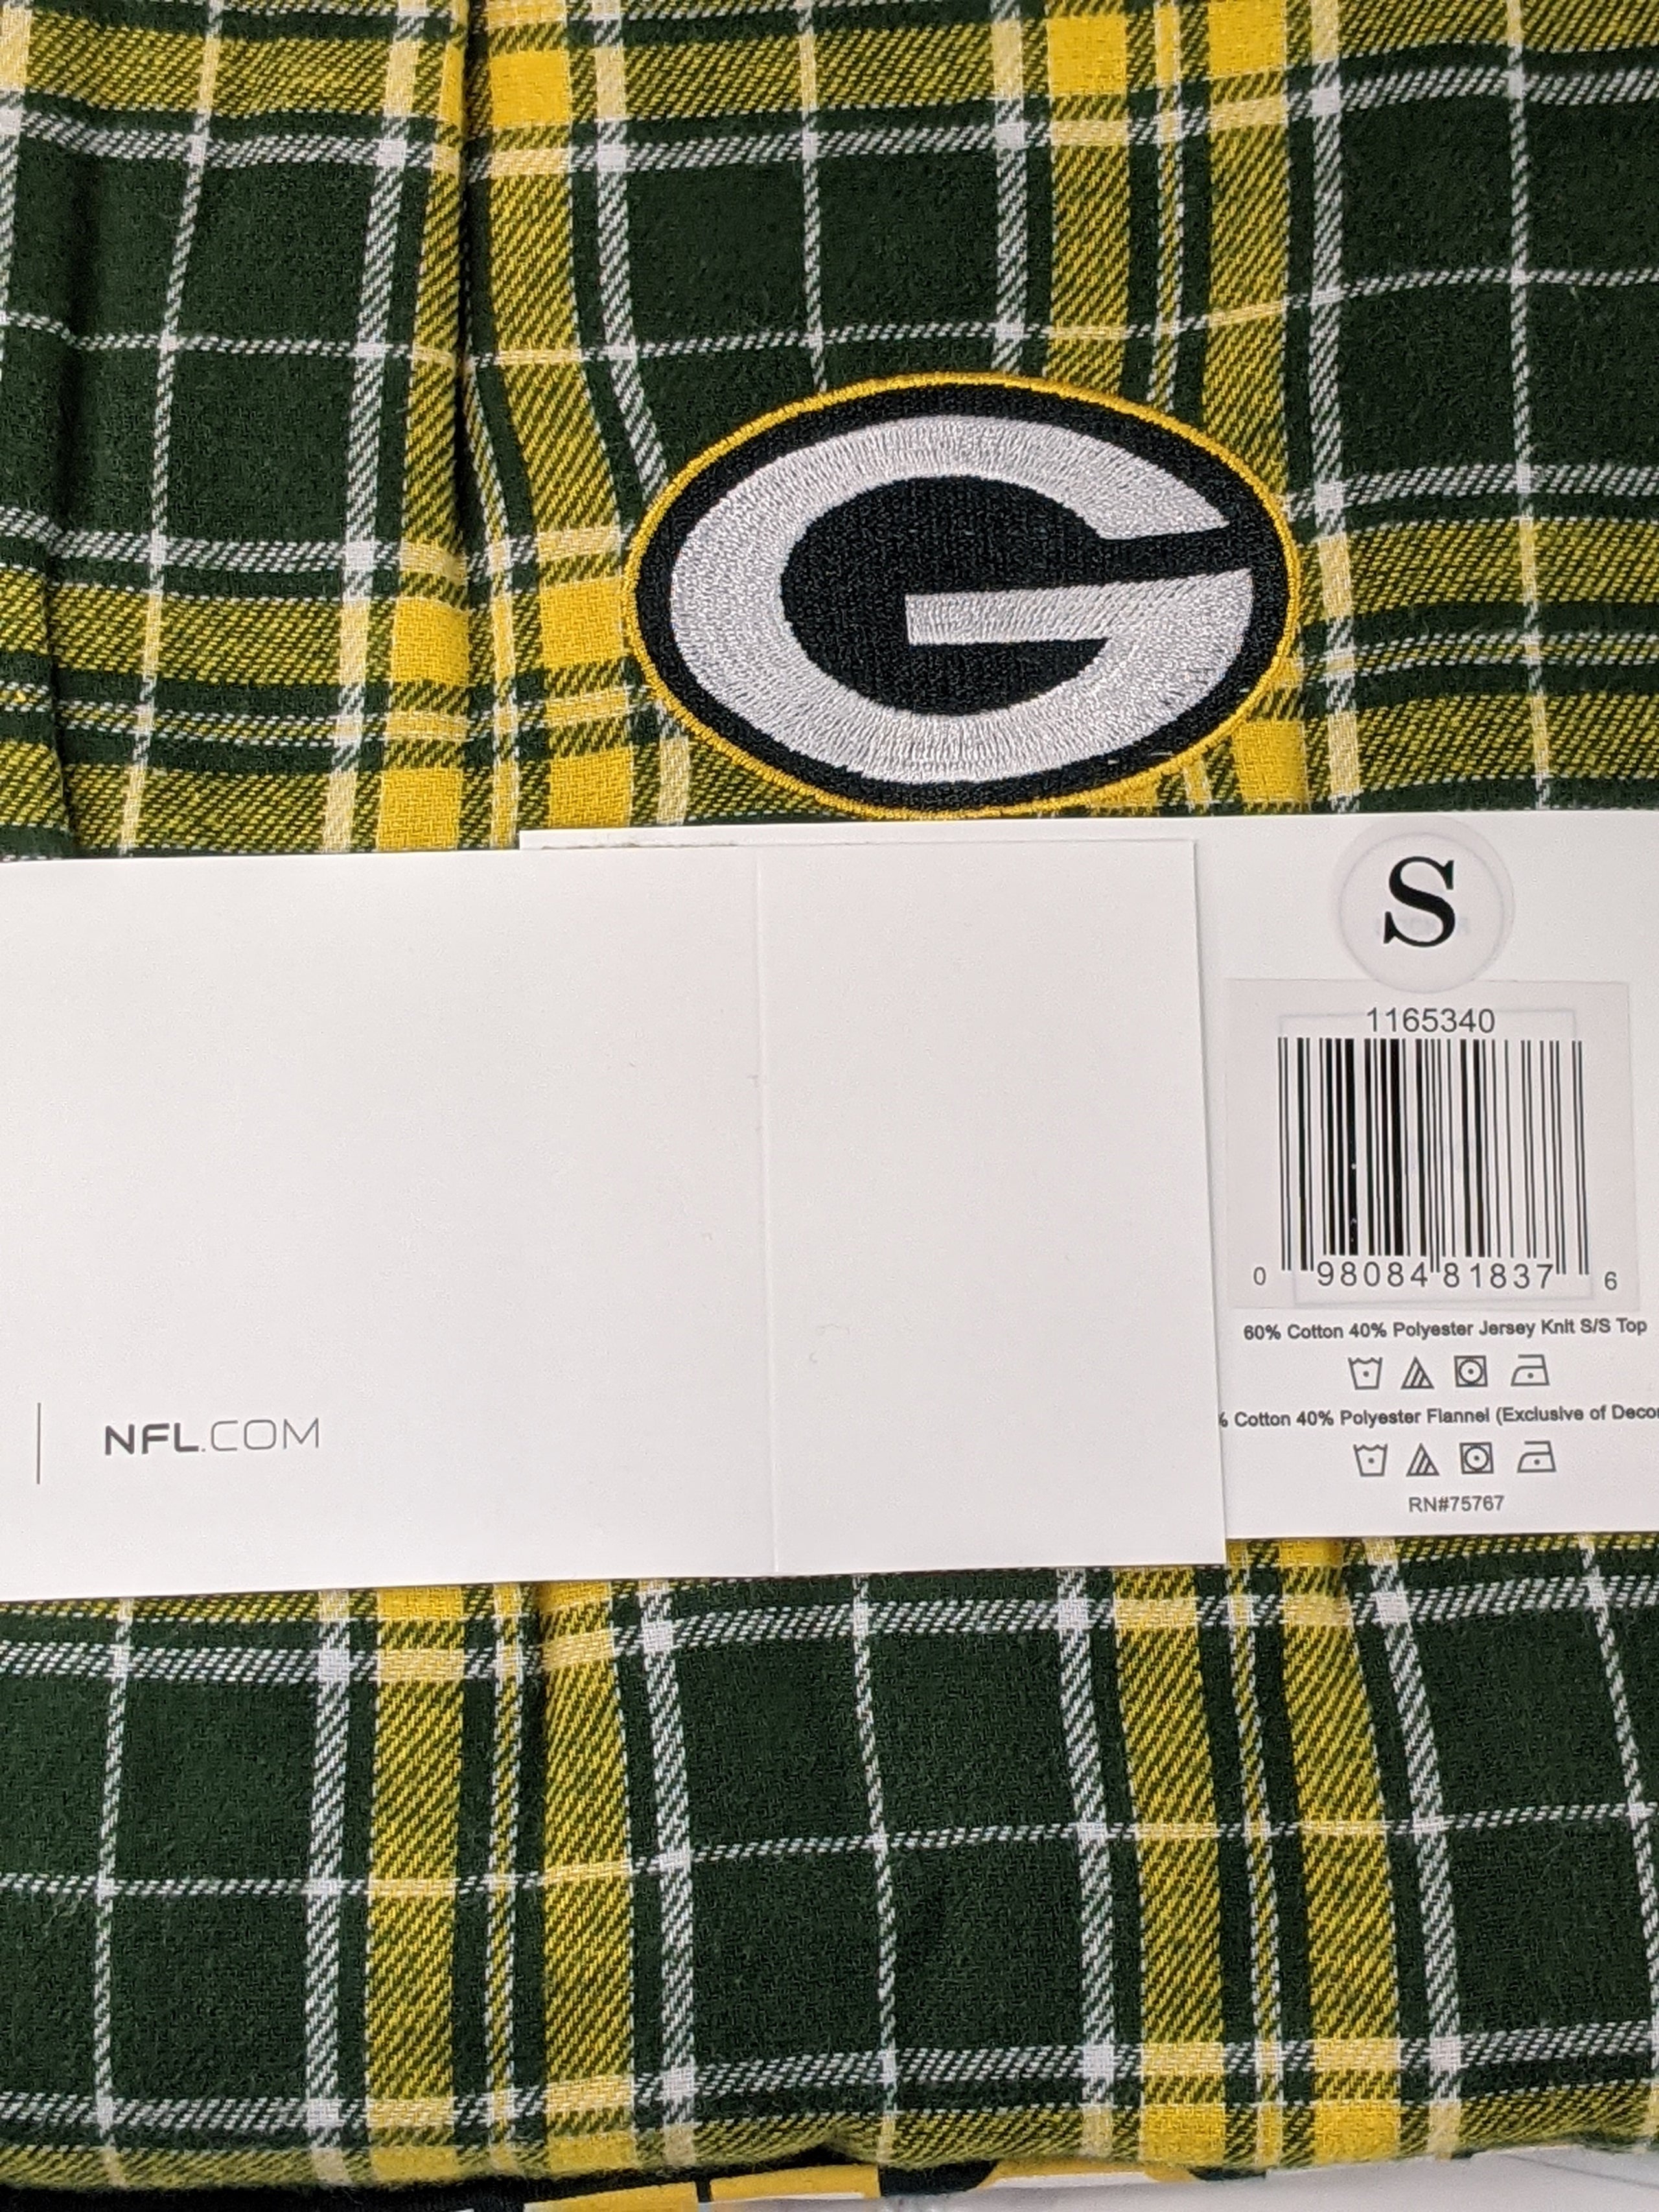 packer flannel shirts